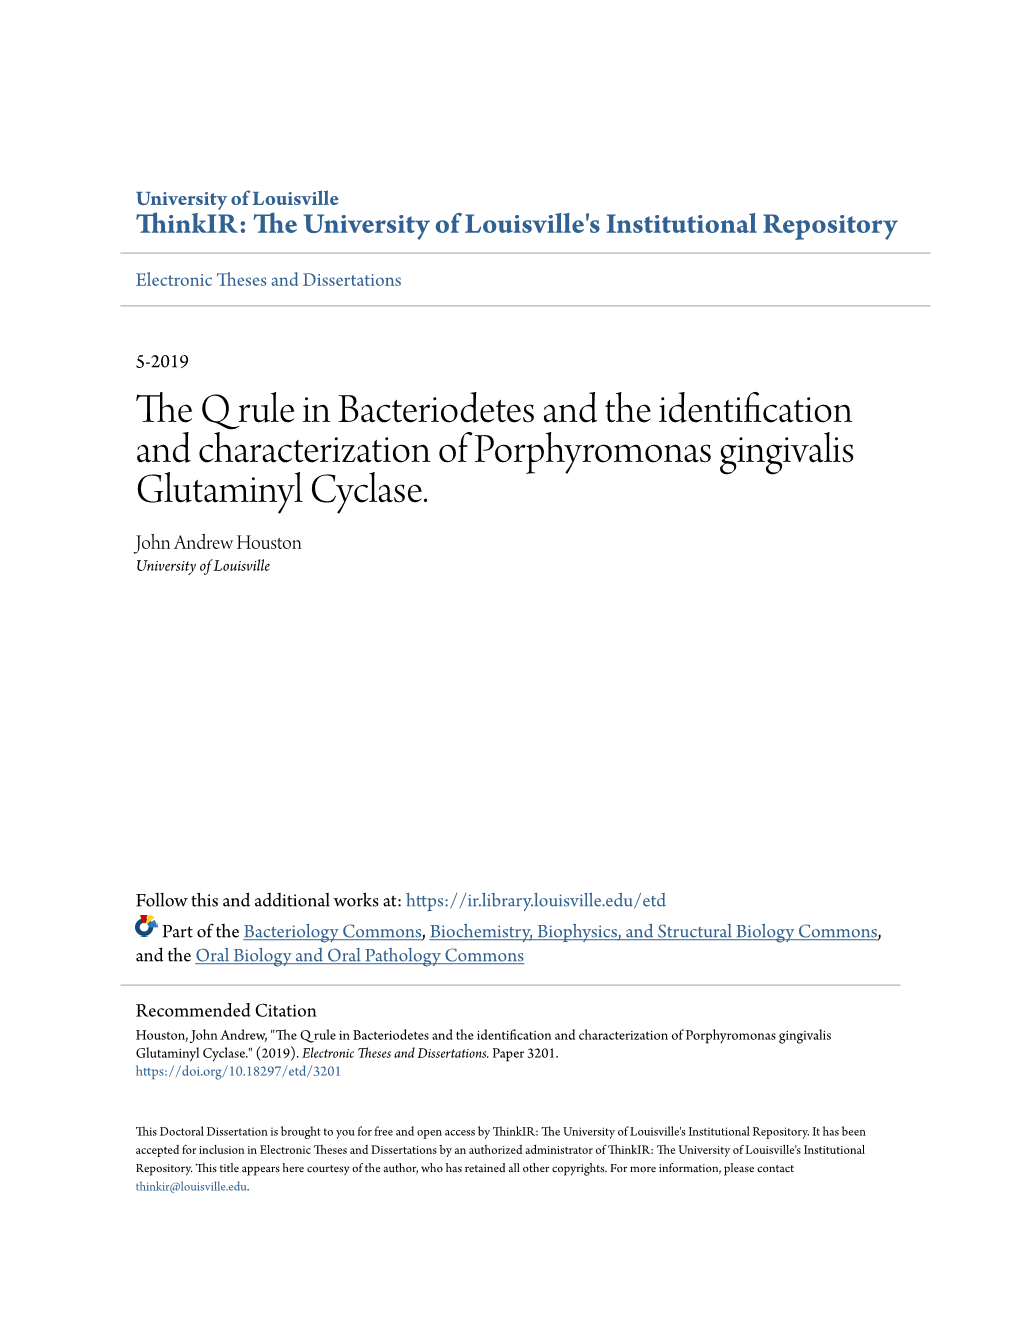 The Q Rule in Bacteriodetes and the Identification and Characterization of Porphyromonas Gingivalis Glutaminyl Cyclase